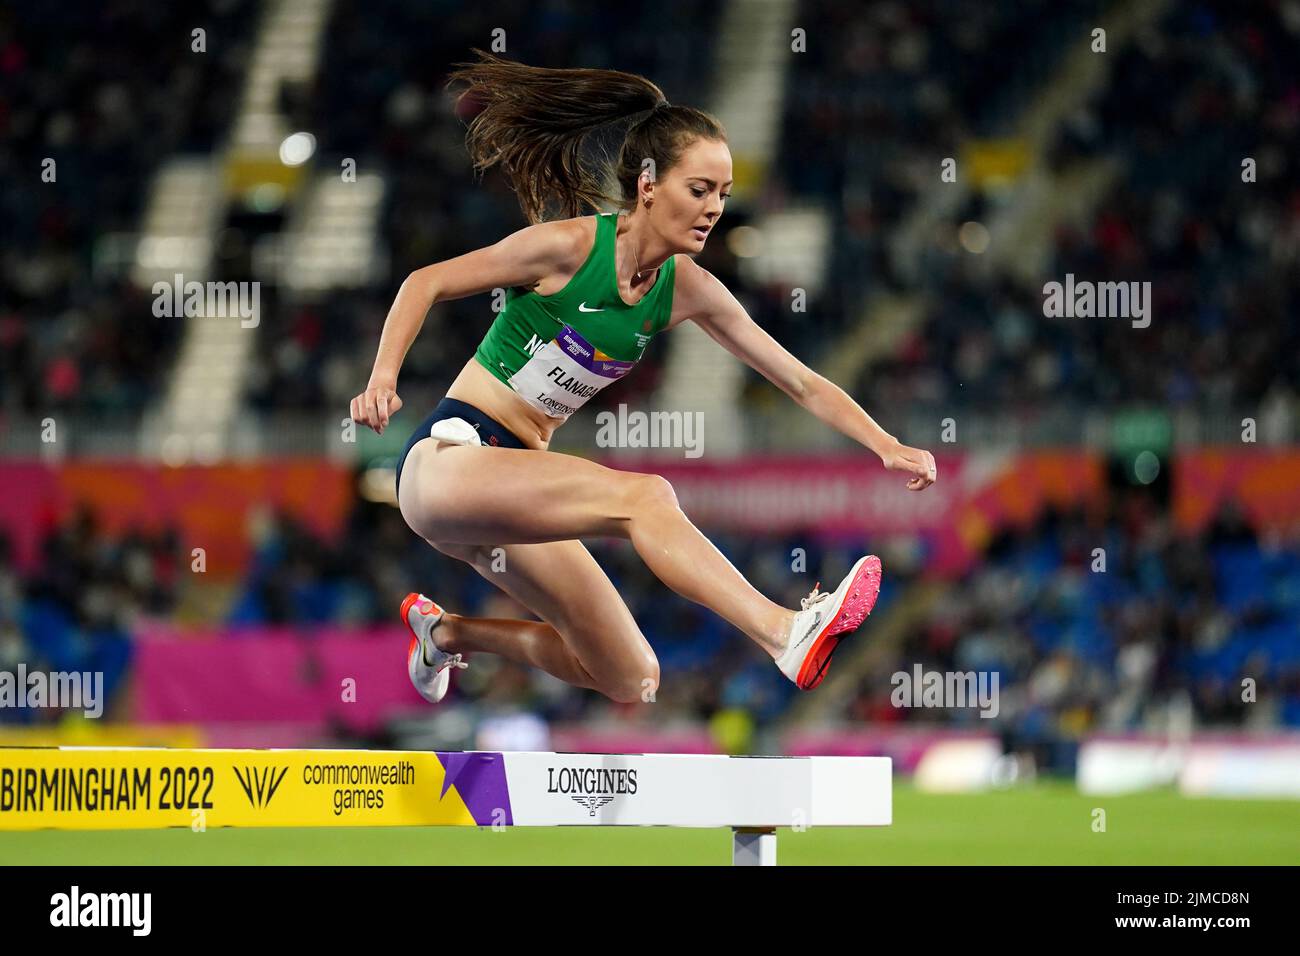 Norther Ireland’s Eilish Flanagan in action during the Women’s 3000m Steeplechase at Alexander Stadium on day eight of the 2022 Commonwealth Games in Birmingham. Picture date: Friday August 5, 2022. Stock Photo